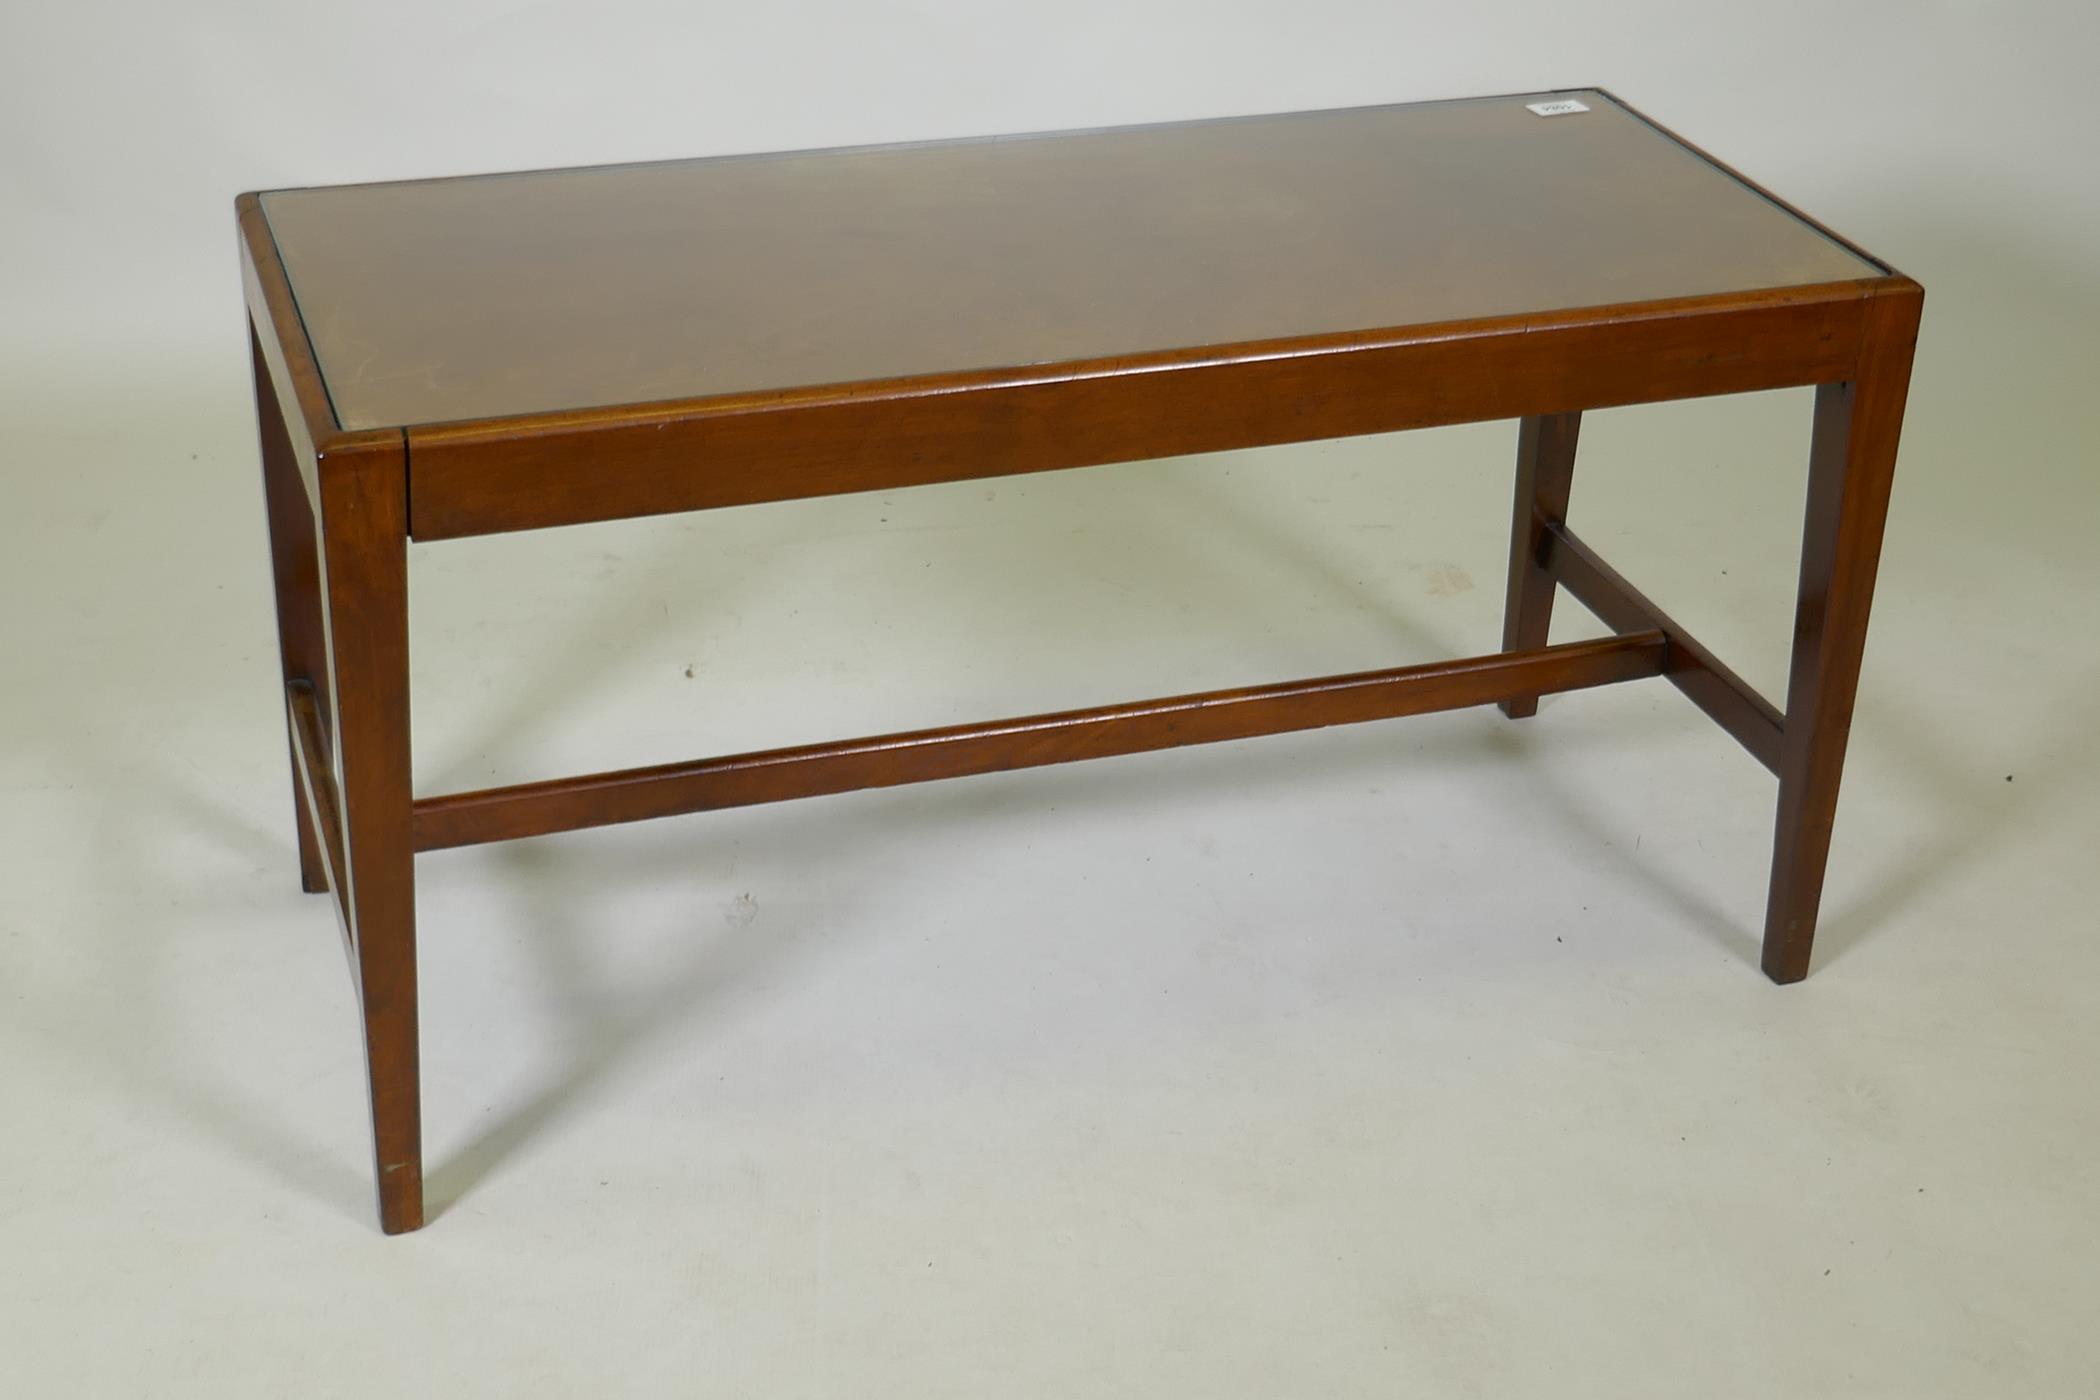 A mahogany occasional table with inset glass top, 40 x 92 x 49 cm